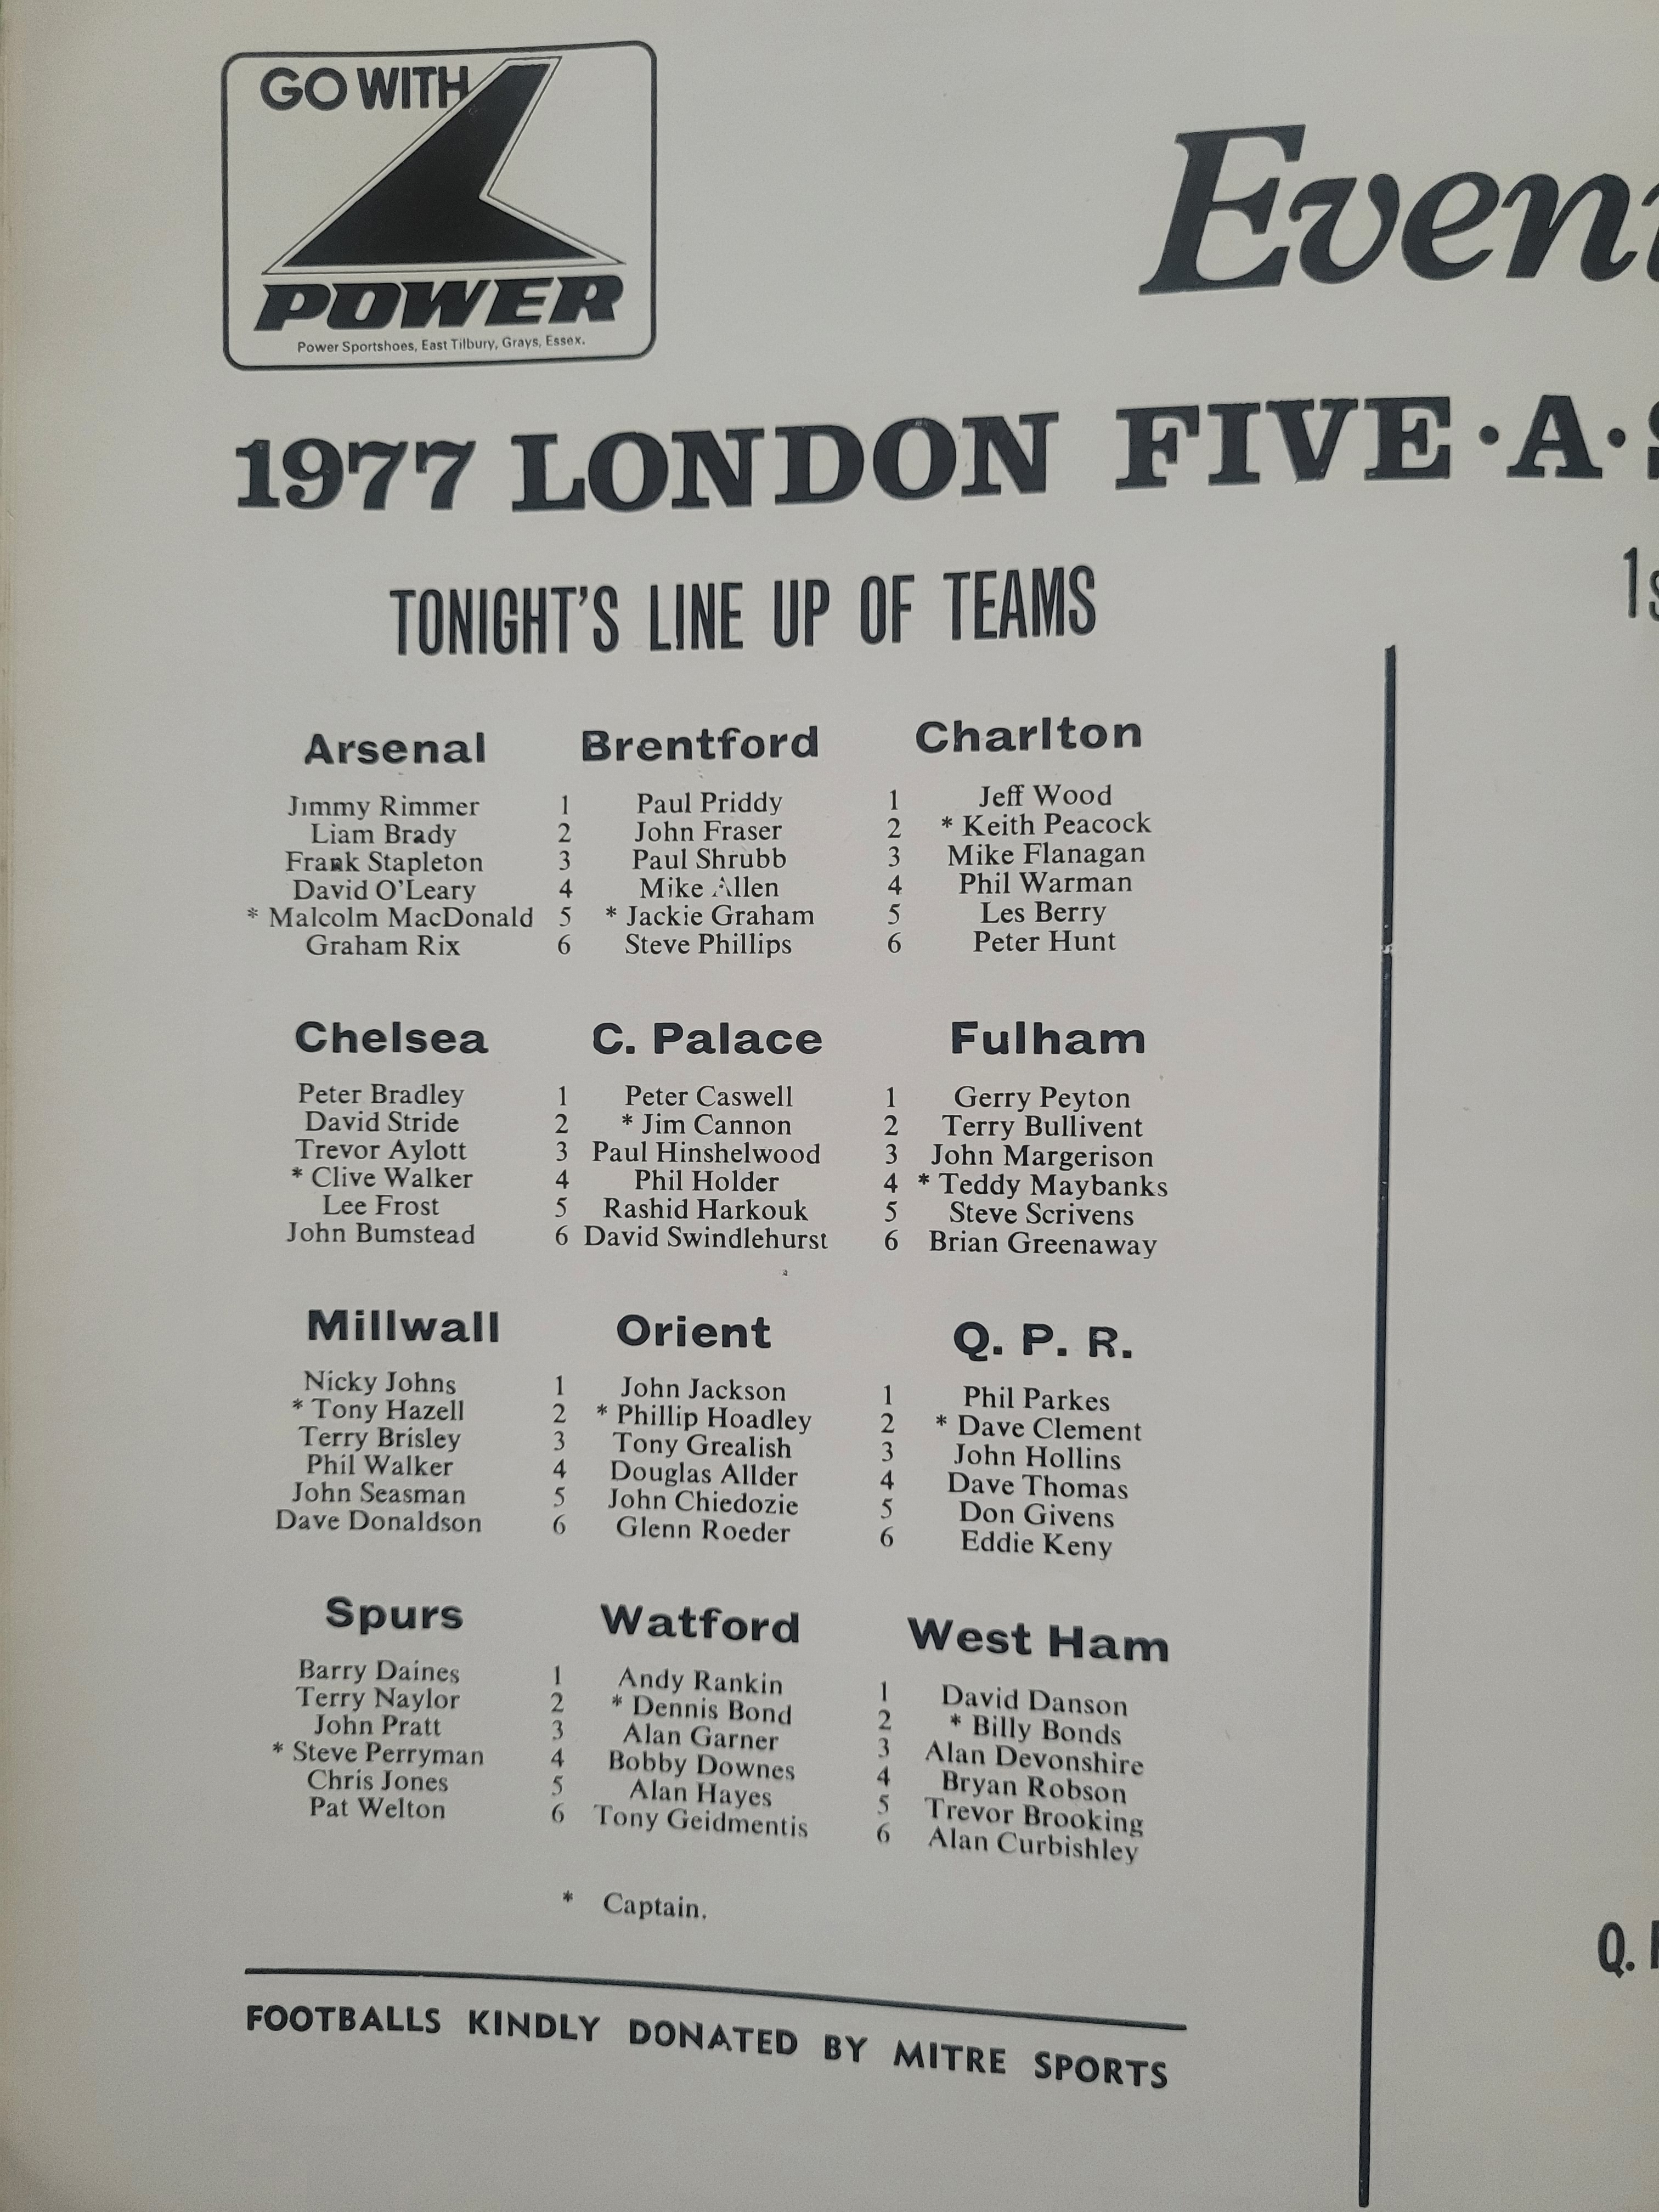 1977 LONDON FIVE-A-SIDE - Image 2 of 2